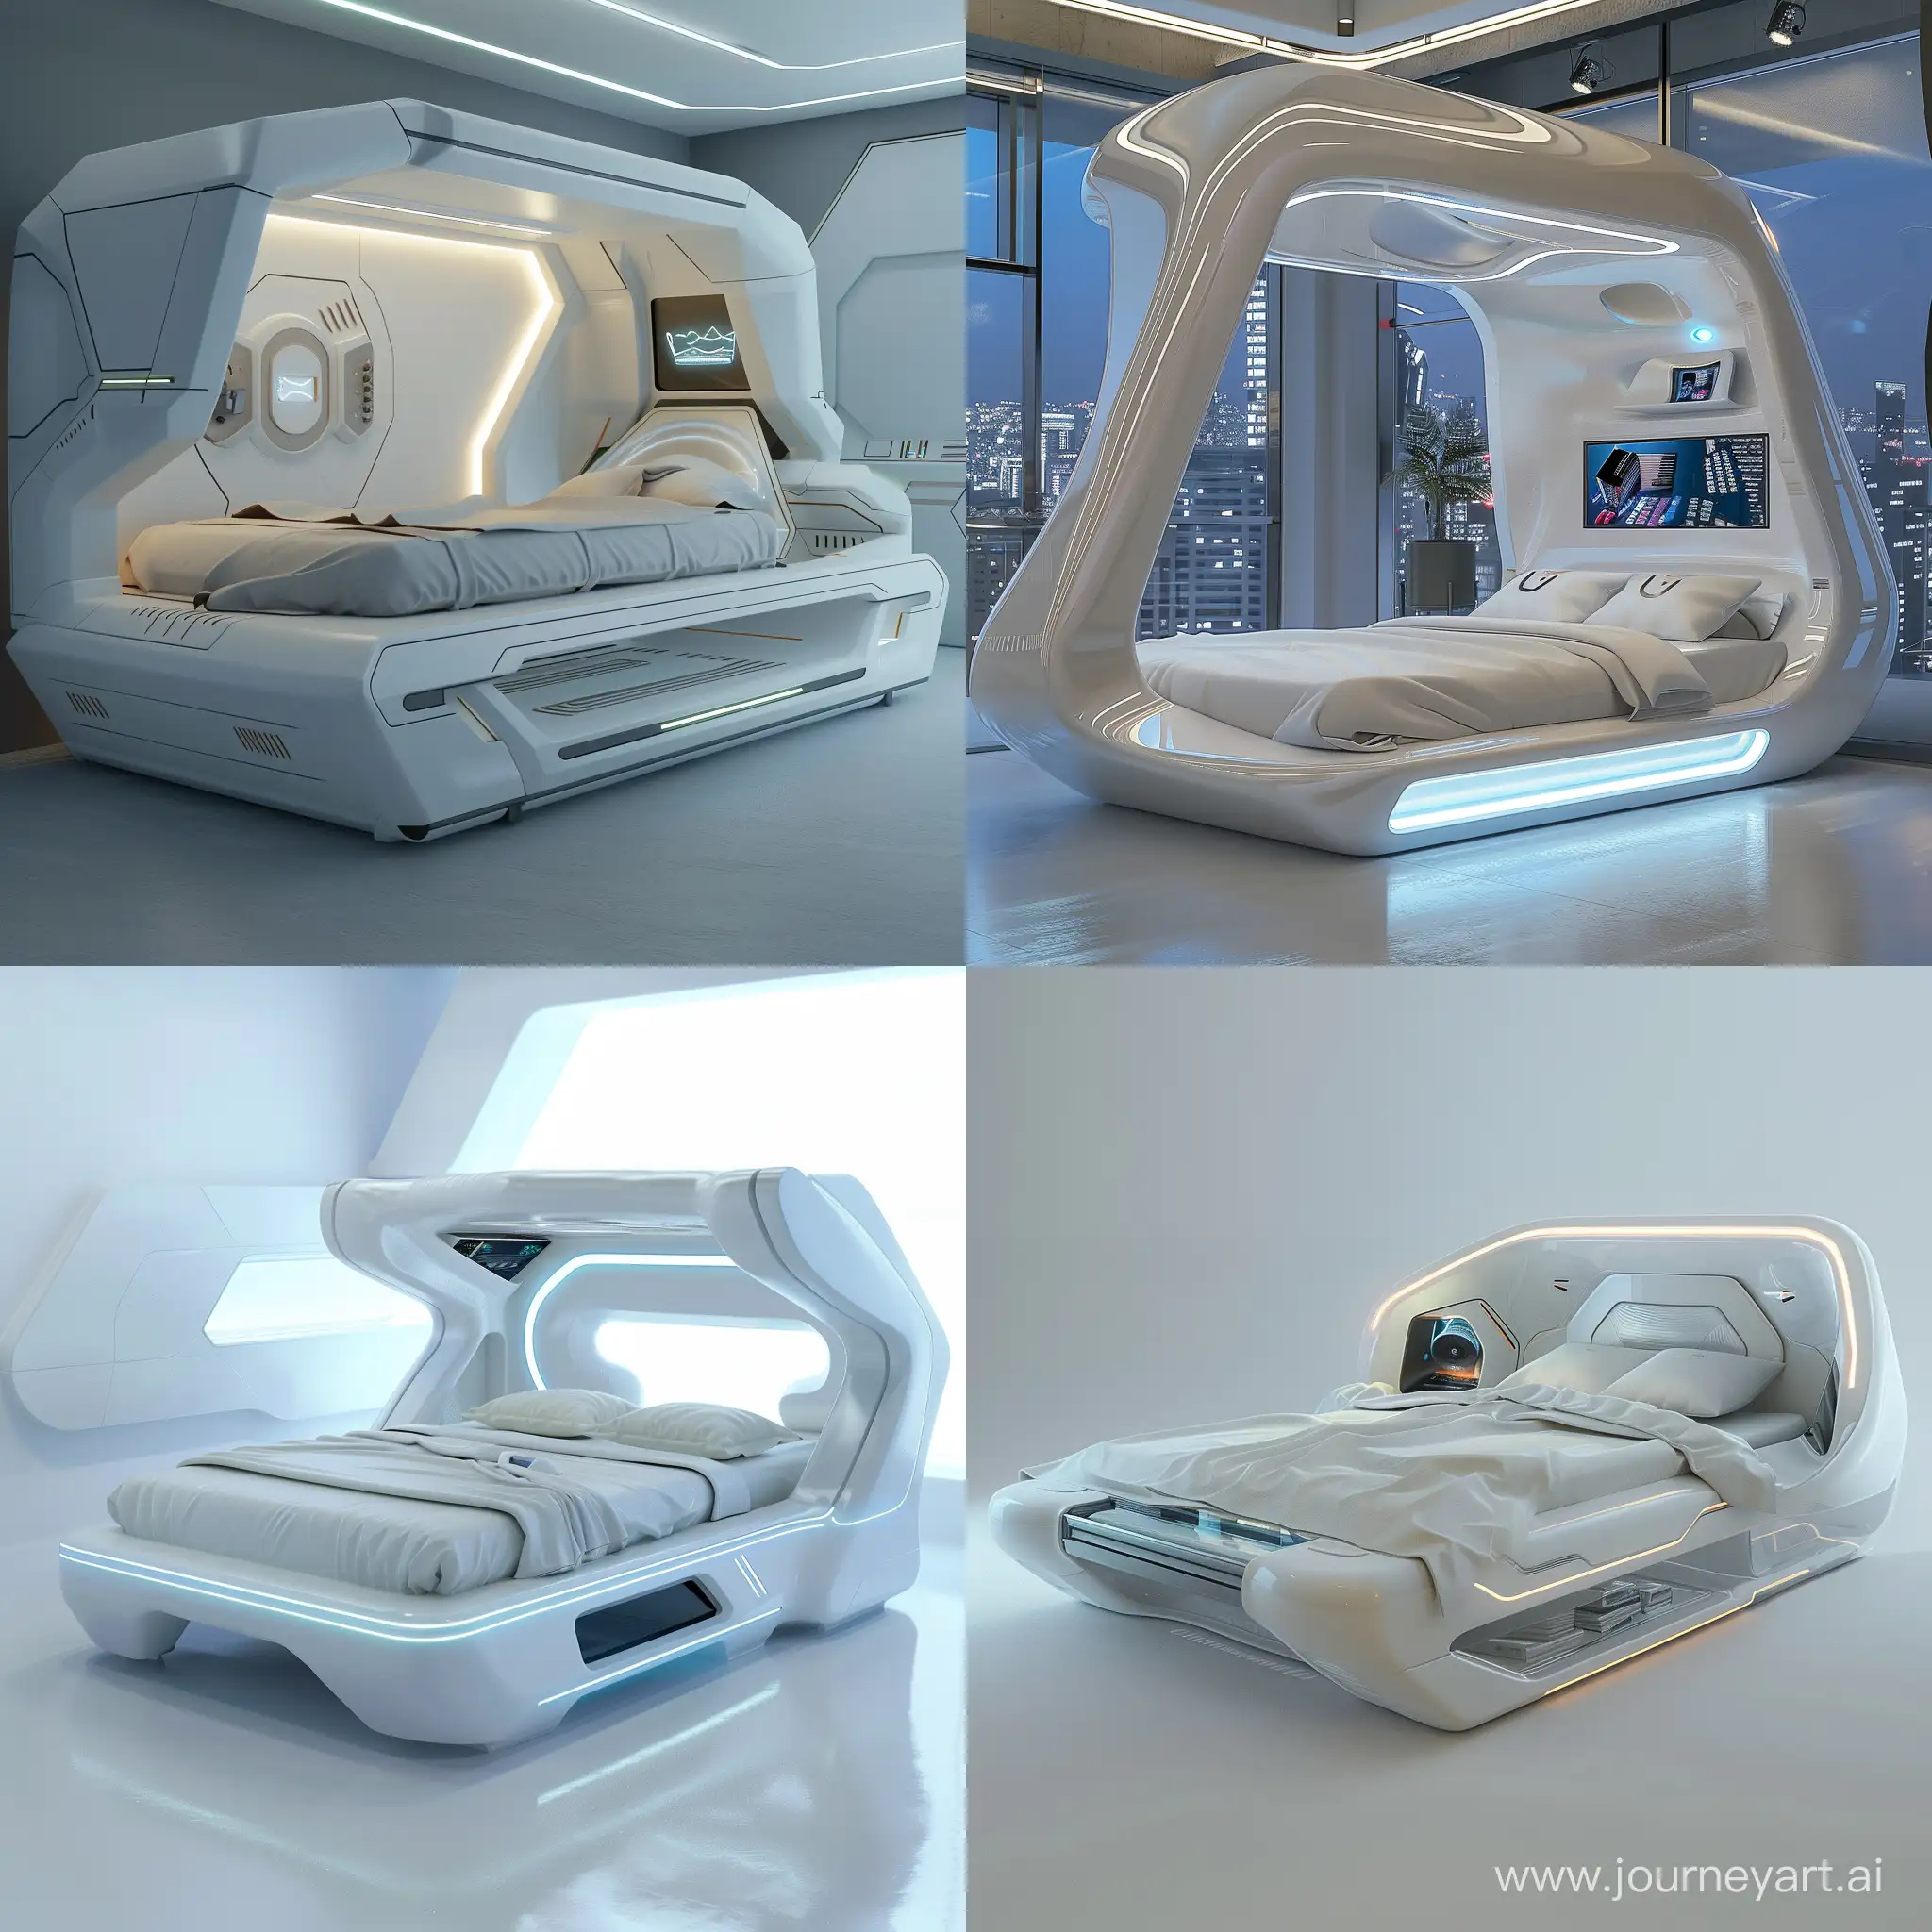 Futuristic-HighTech-Bed-Made-of-Renewable-Materials